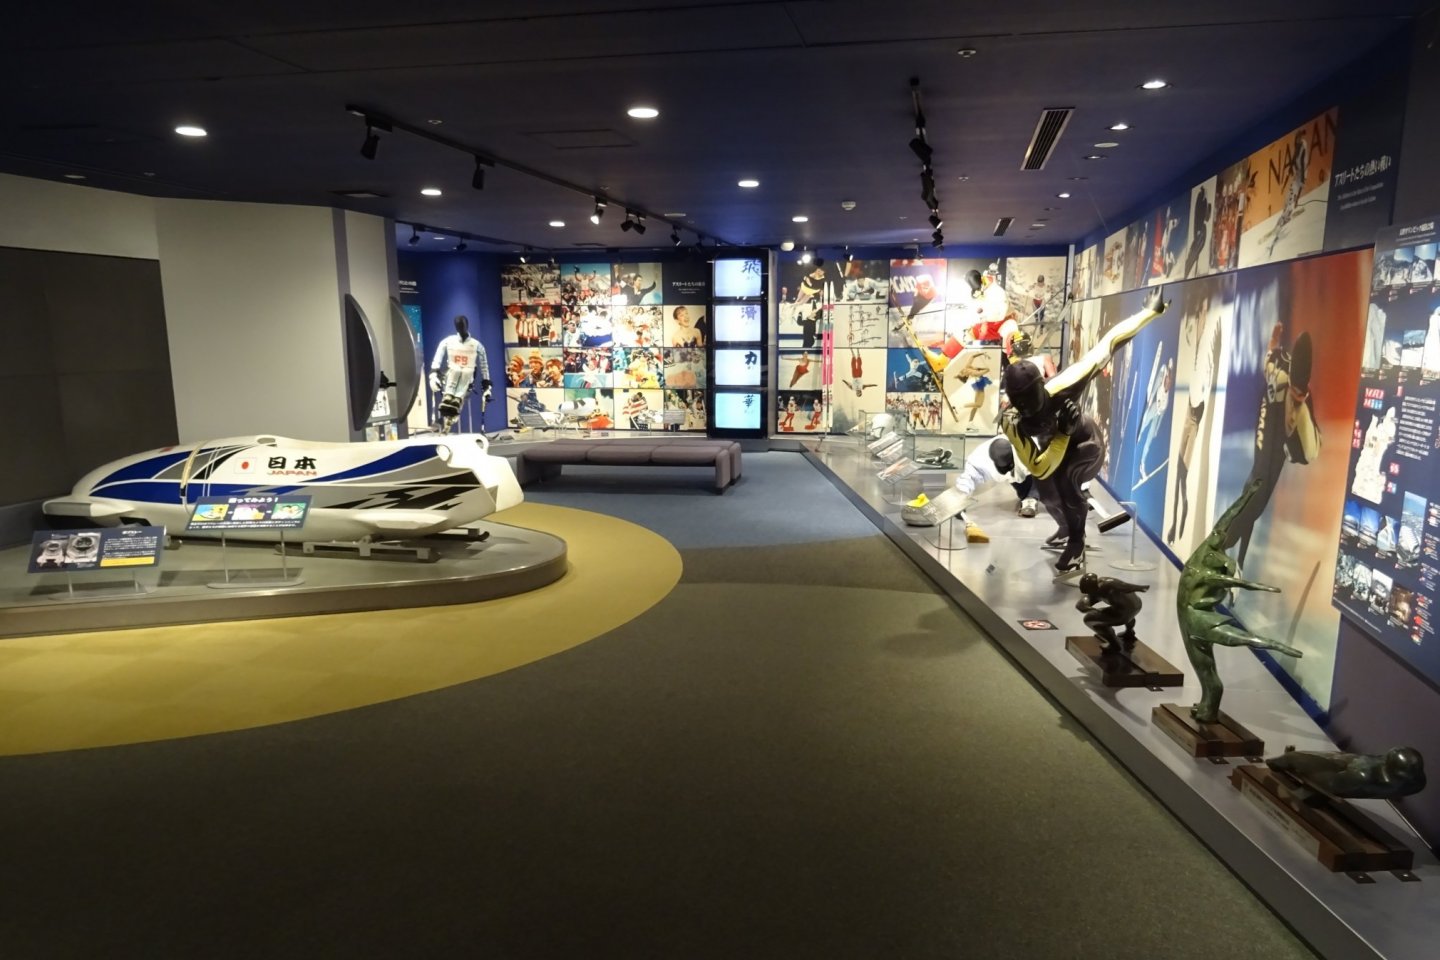 Part of the Nagano Olympic Museum